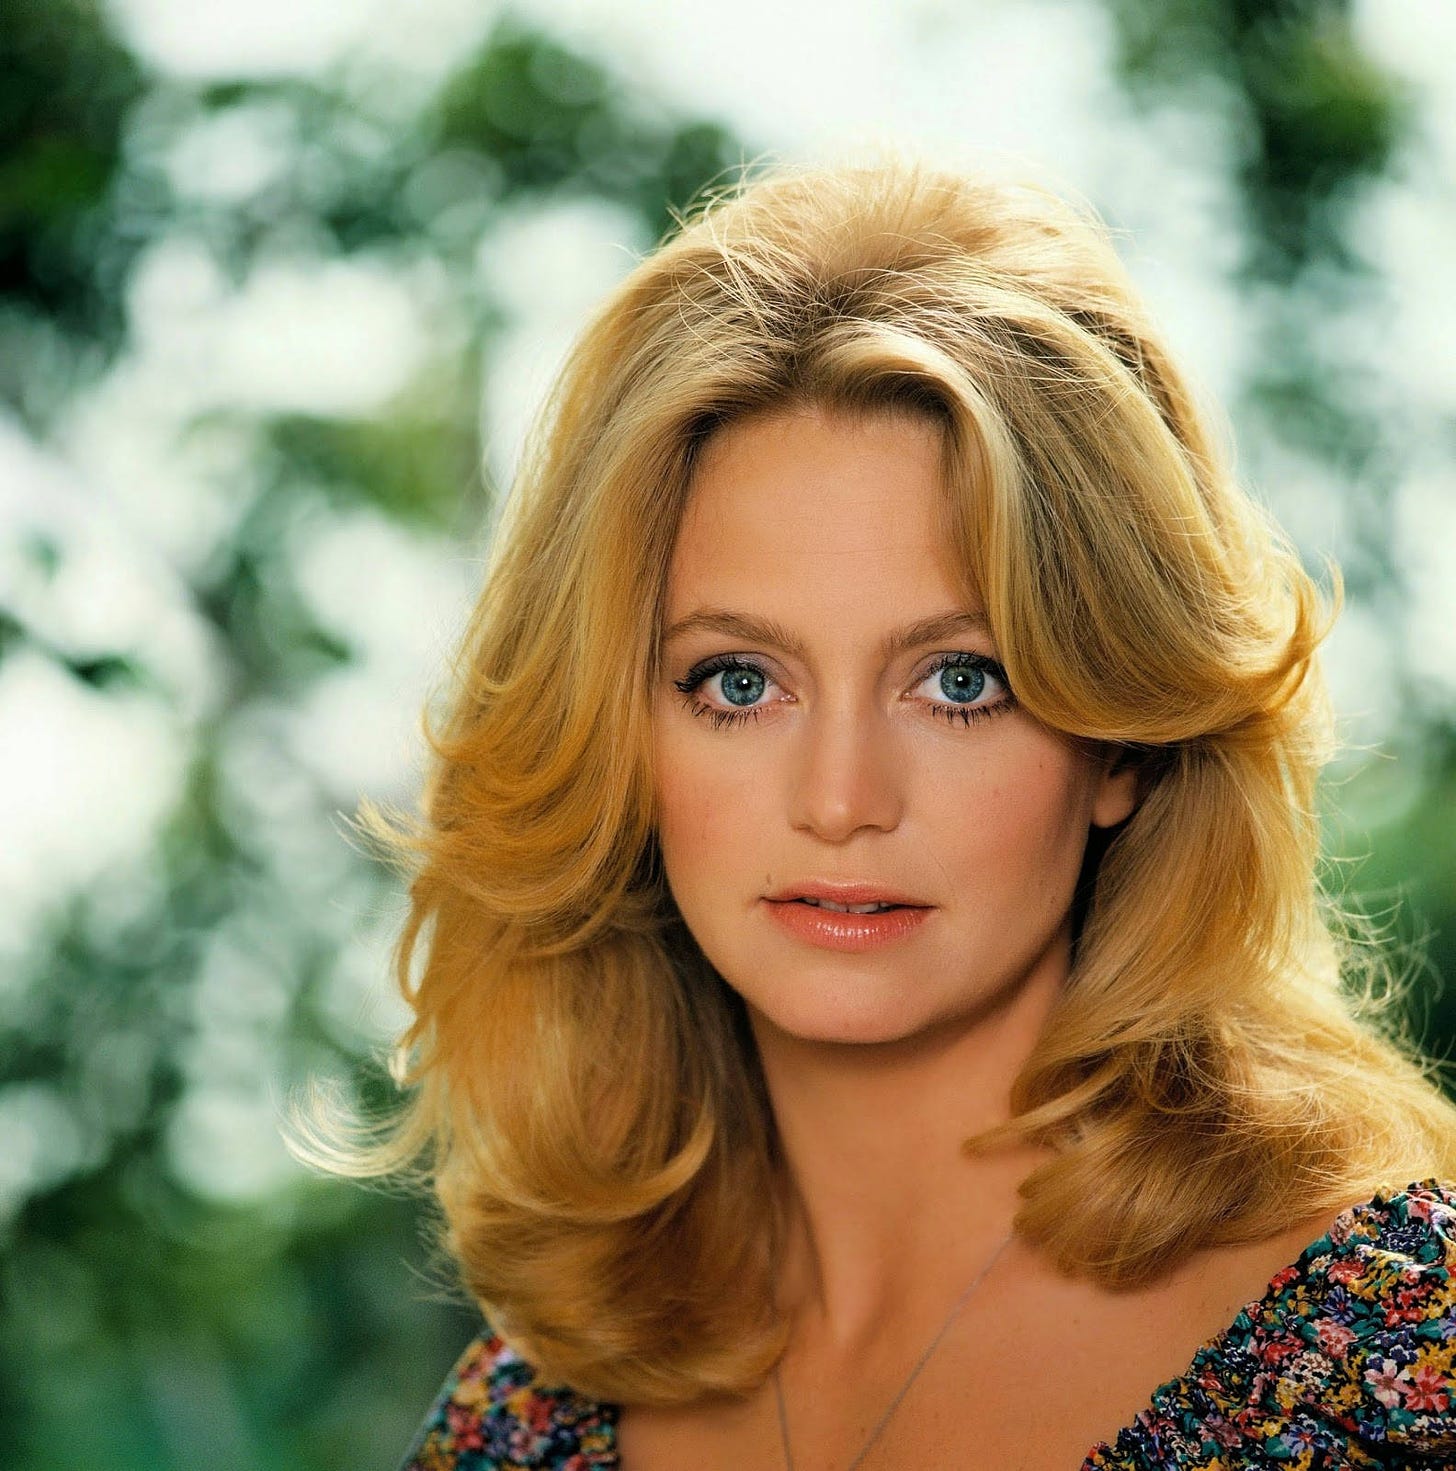 100+] Goldie Hawn Wallpapers | Wallpapers.com